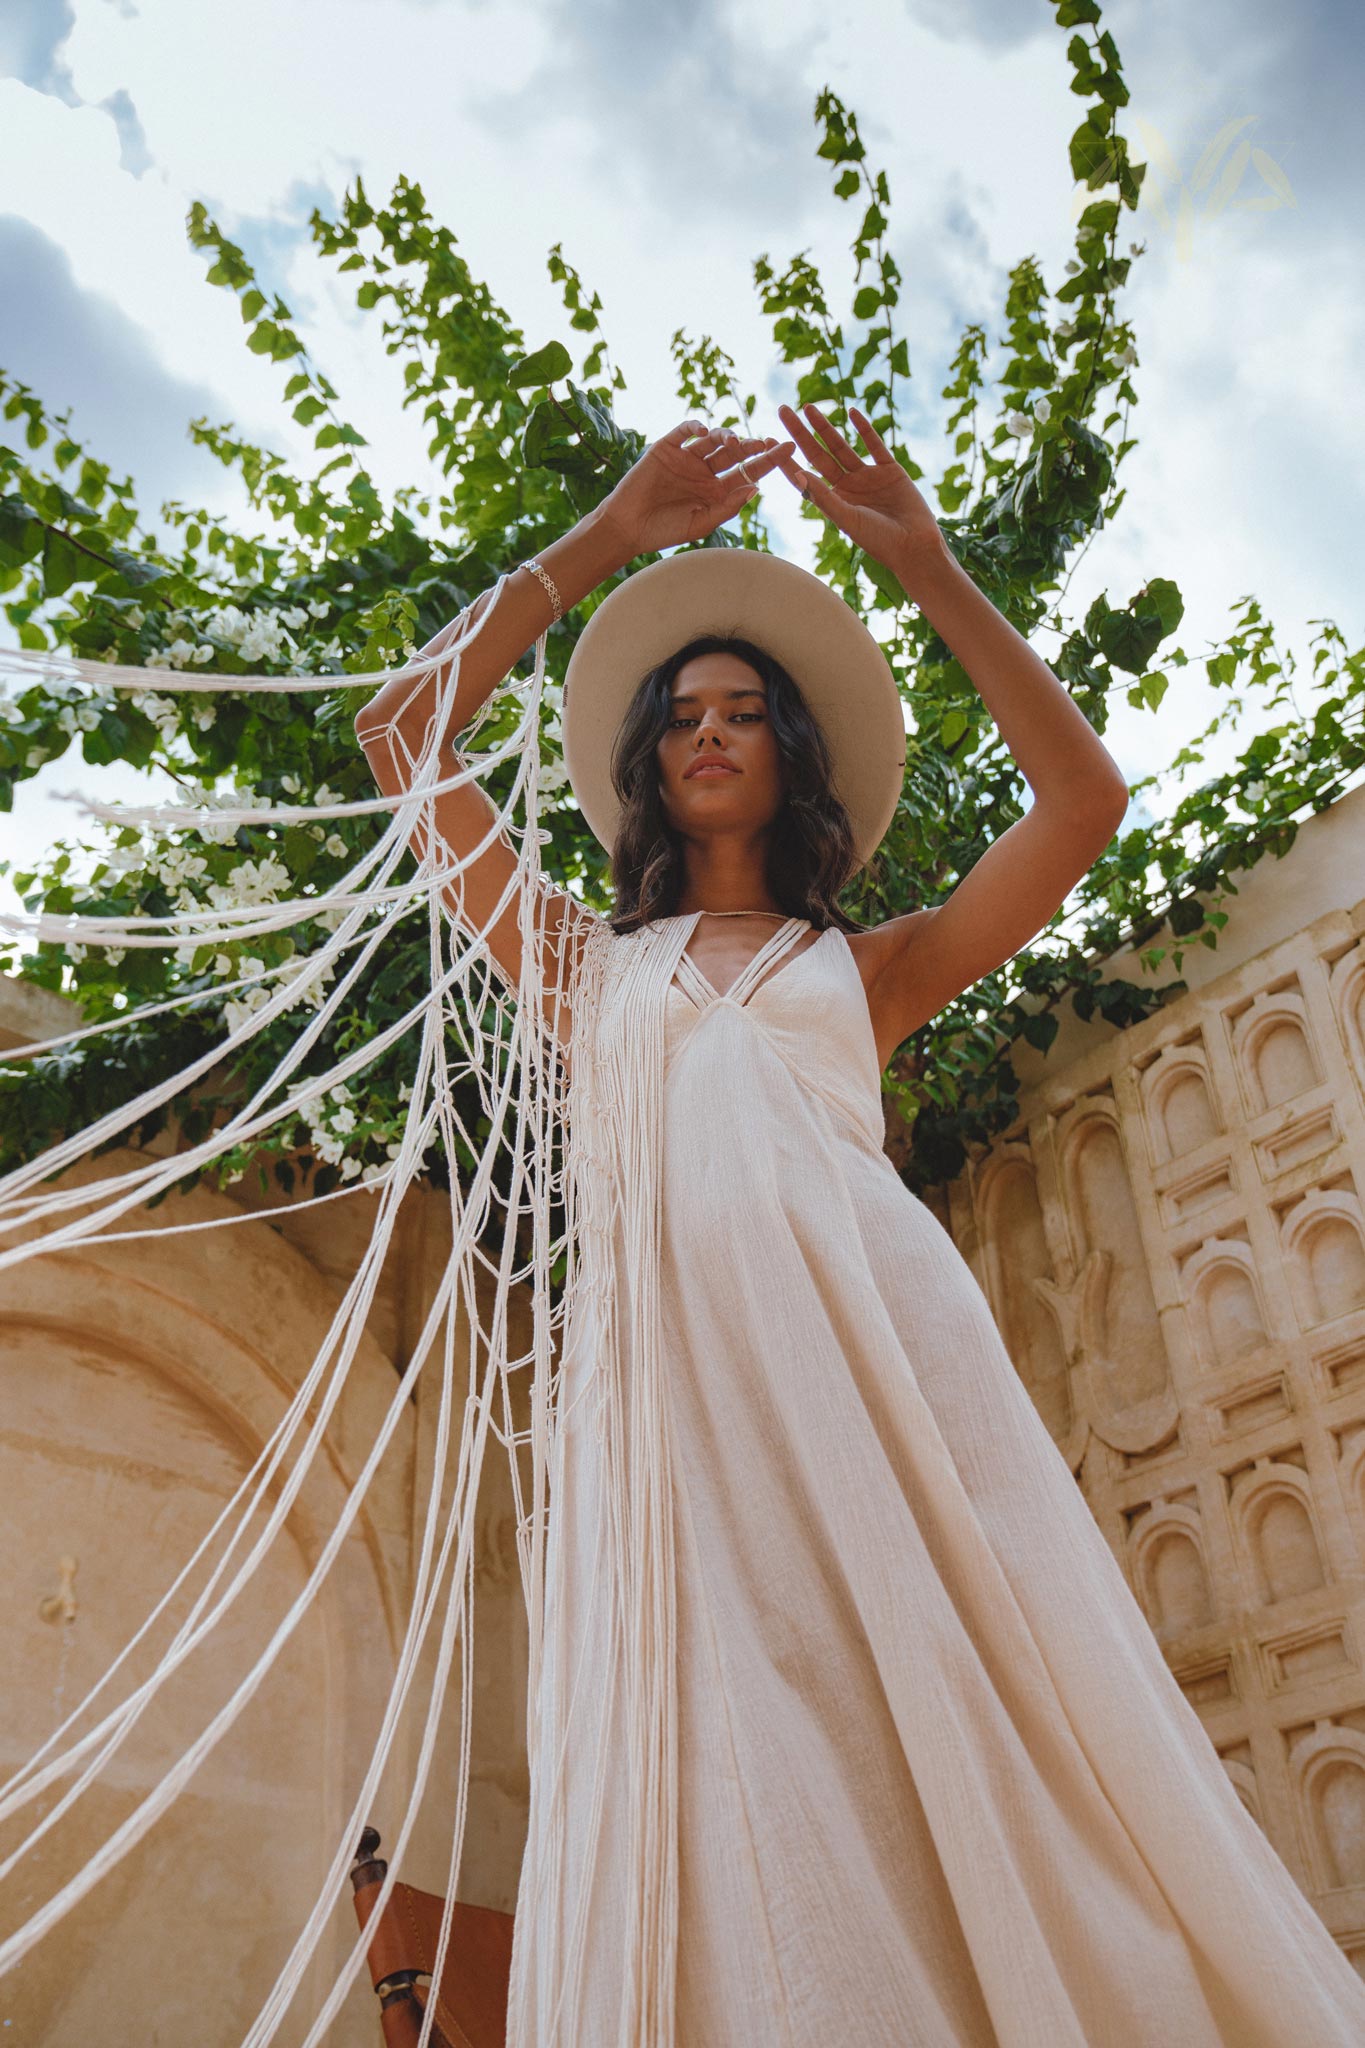 Off-White Low Back Slit Dress with handmade macramé design. Adjustable straps enhance the sensual and decorative look. Made with 50% Linen, 50% Cotton.